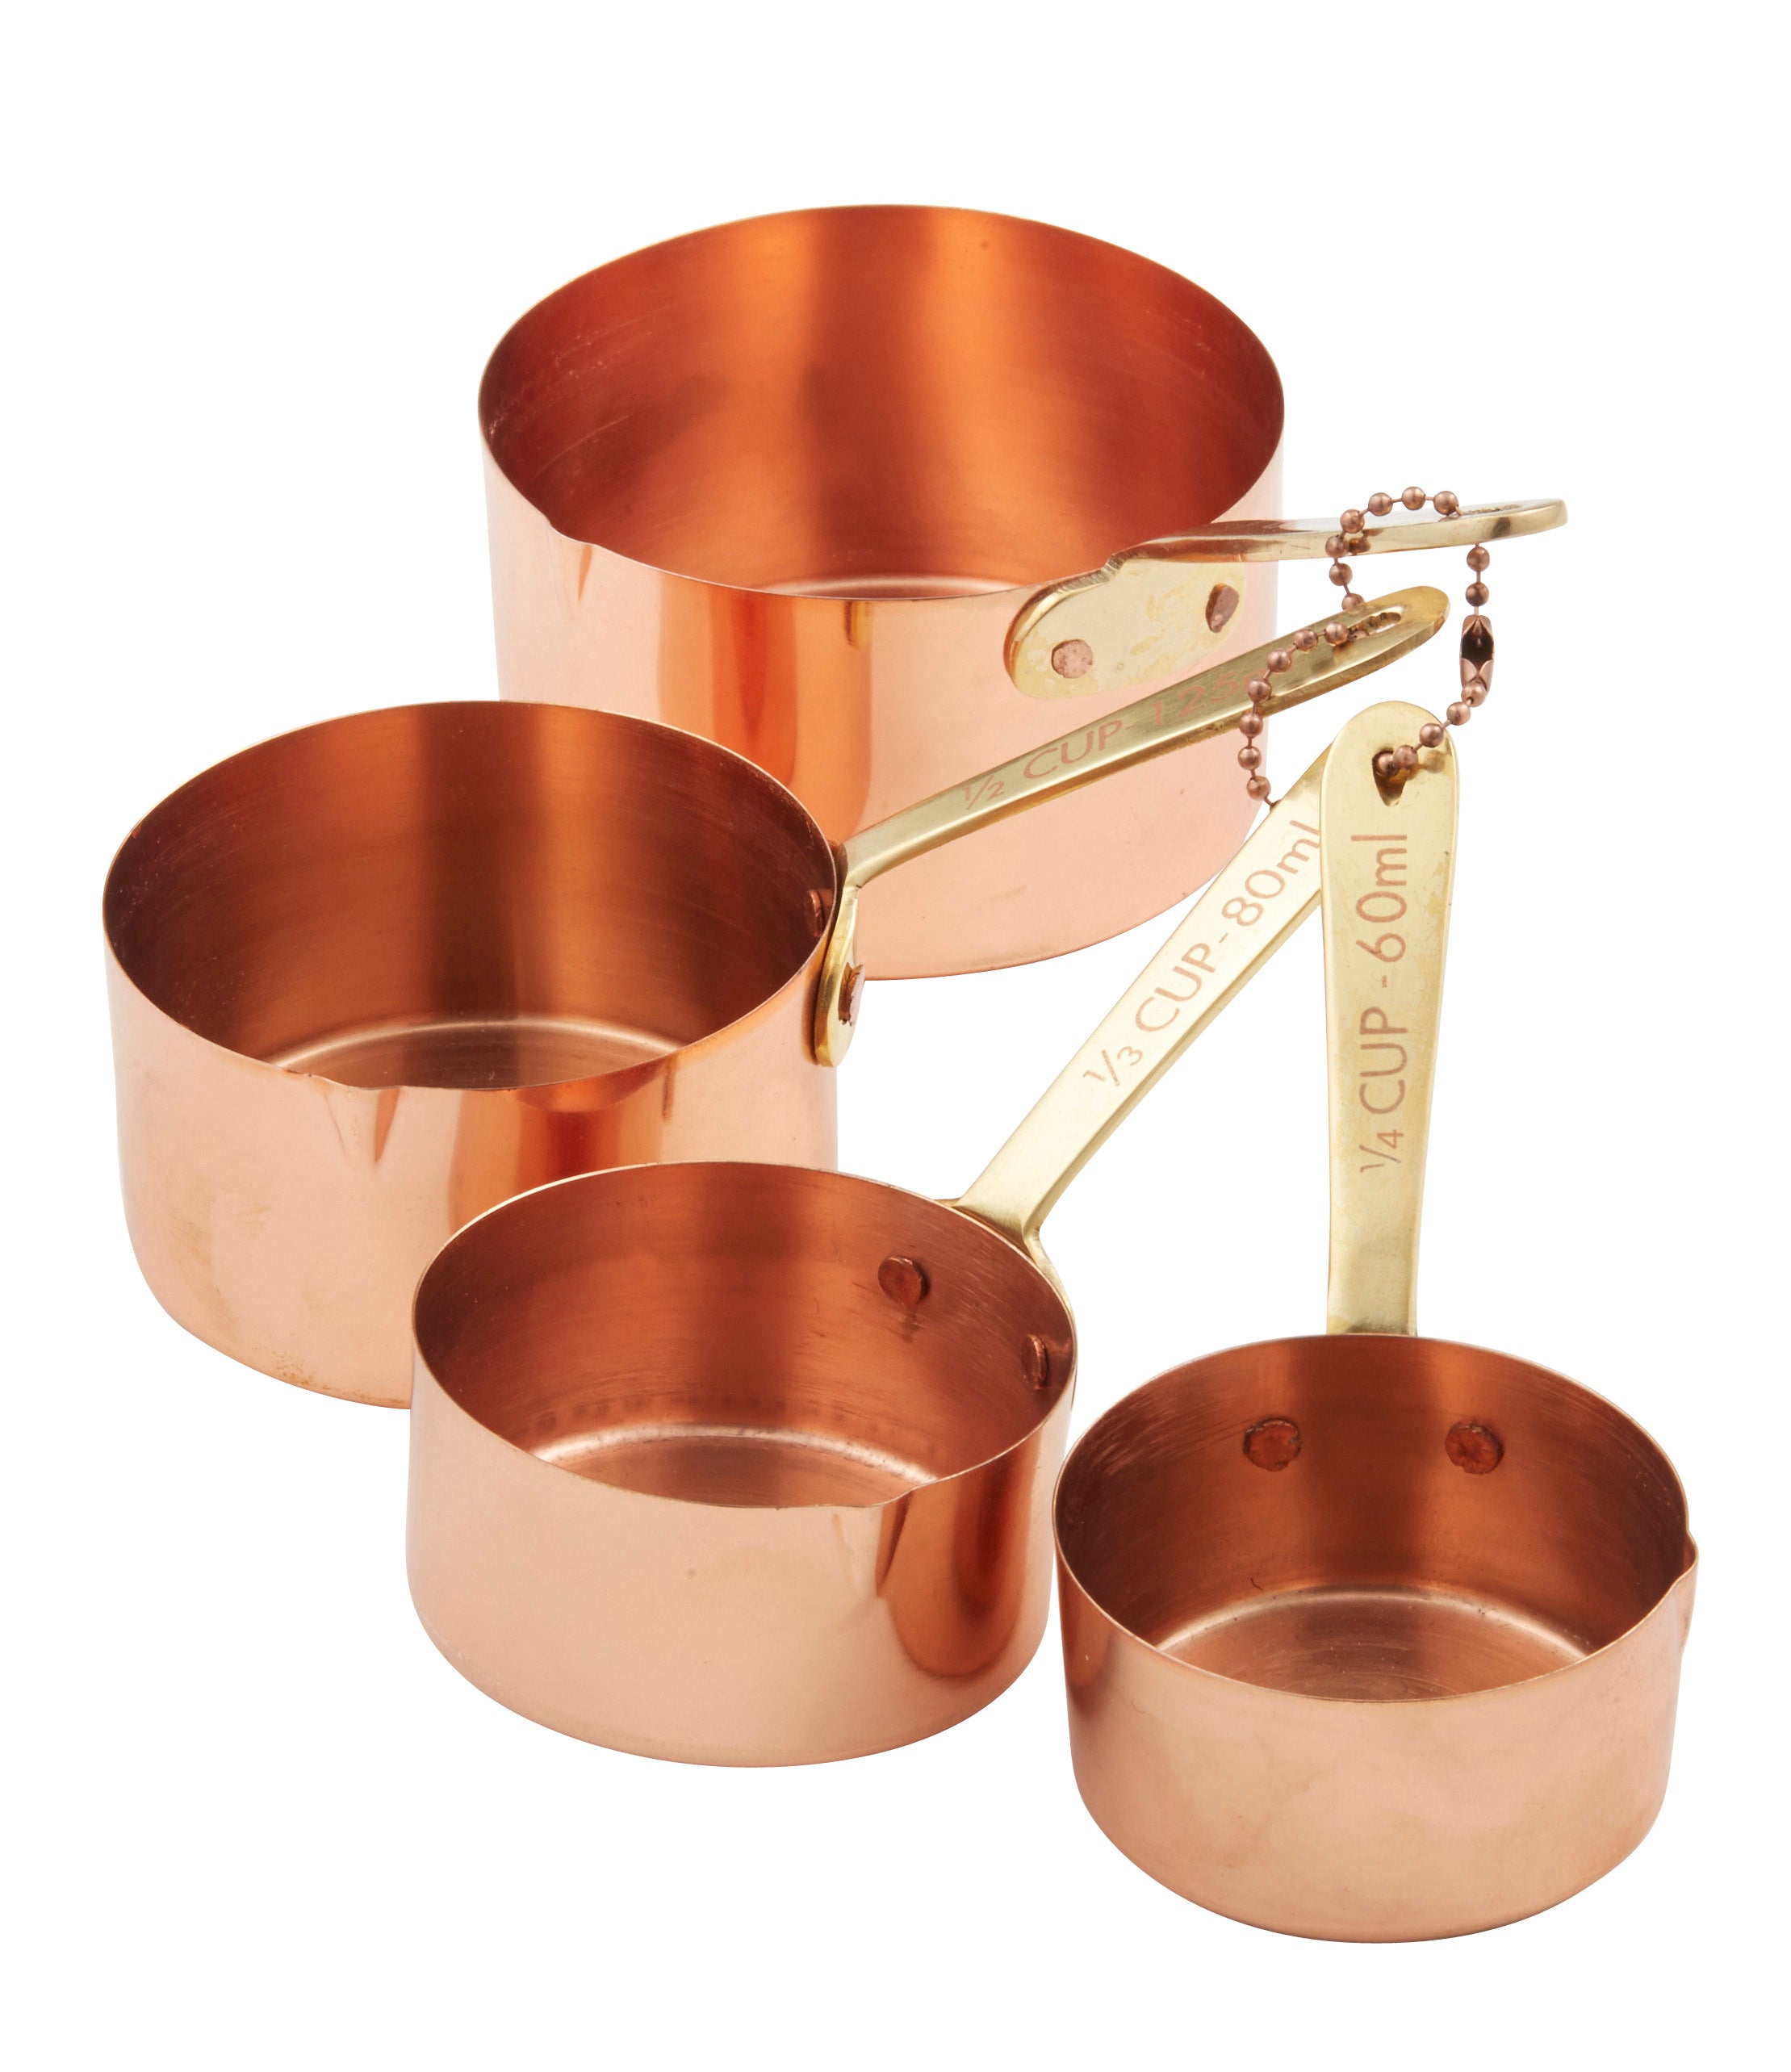 Academy Measuring Cups Copper Plated Cooking Baking Kitchen Tools Set of 4